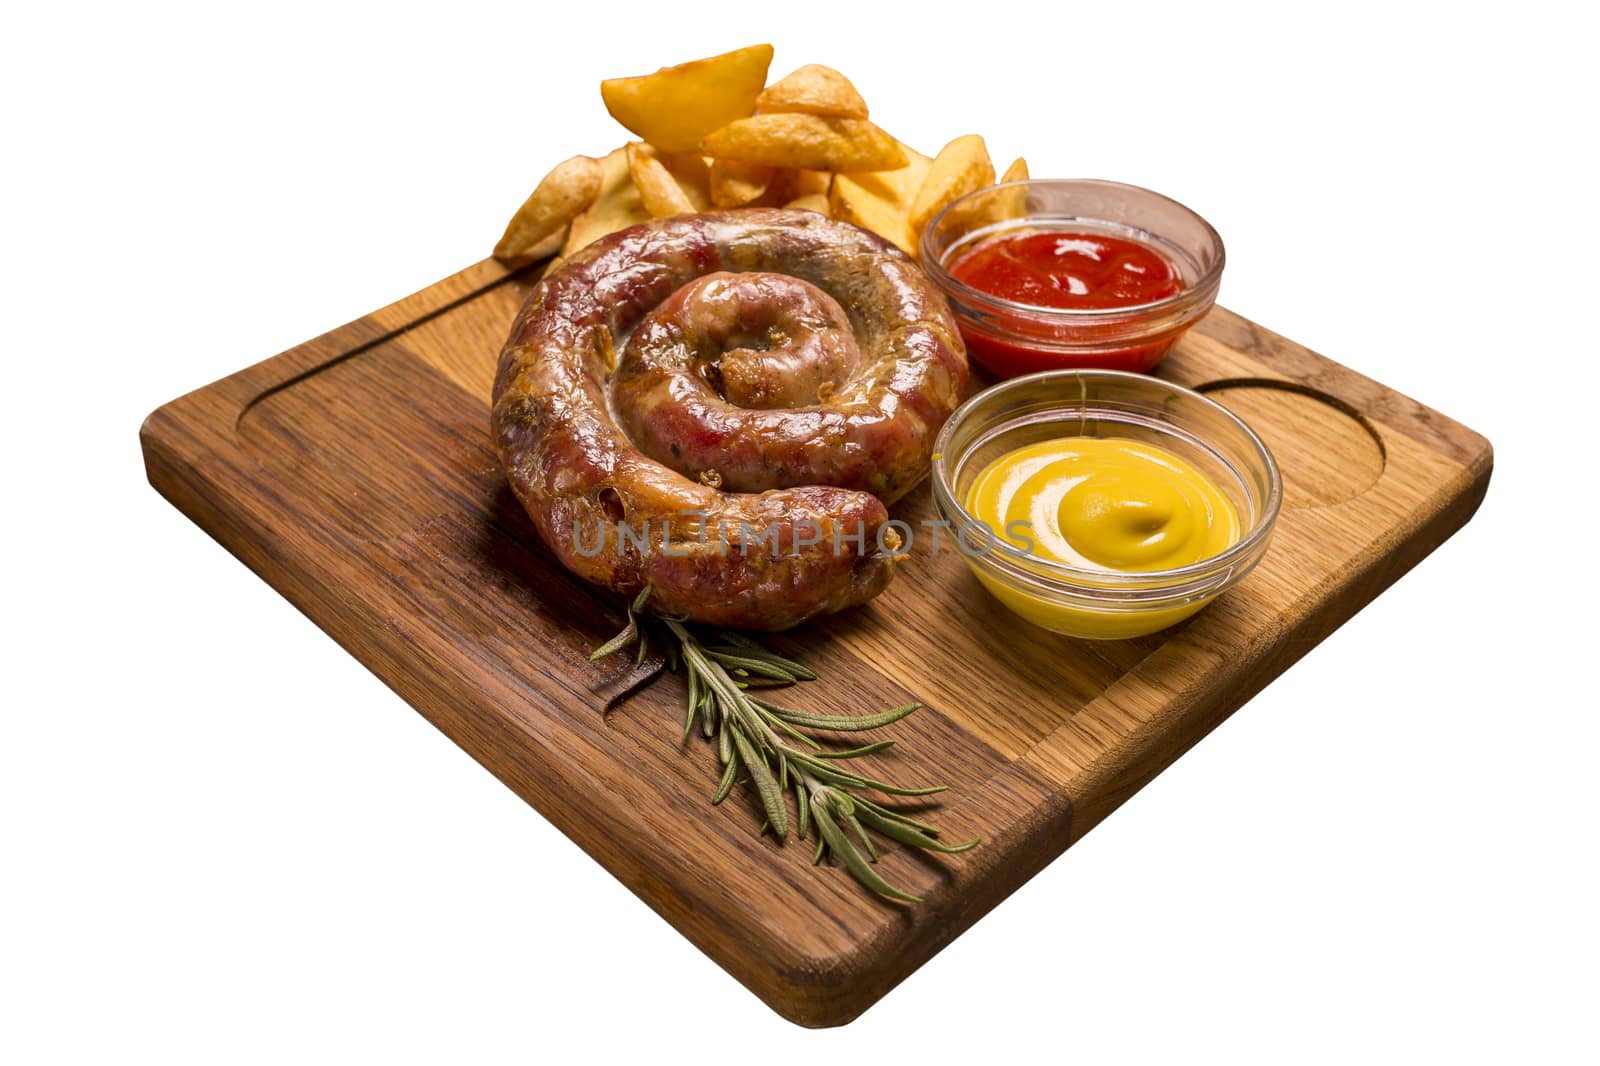 Grilled sausages with french fries with ketchup and mustard on a wooden stand by 977_ReX_977